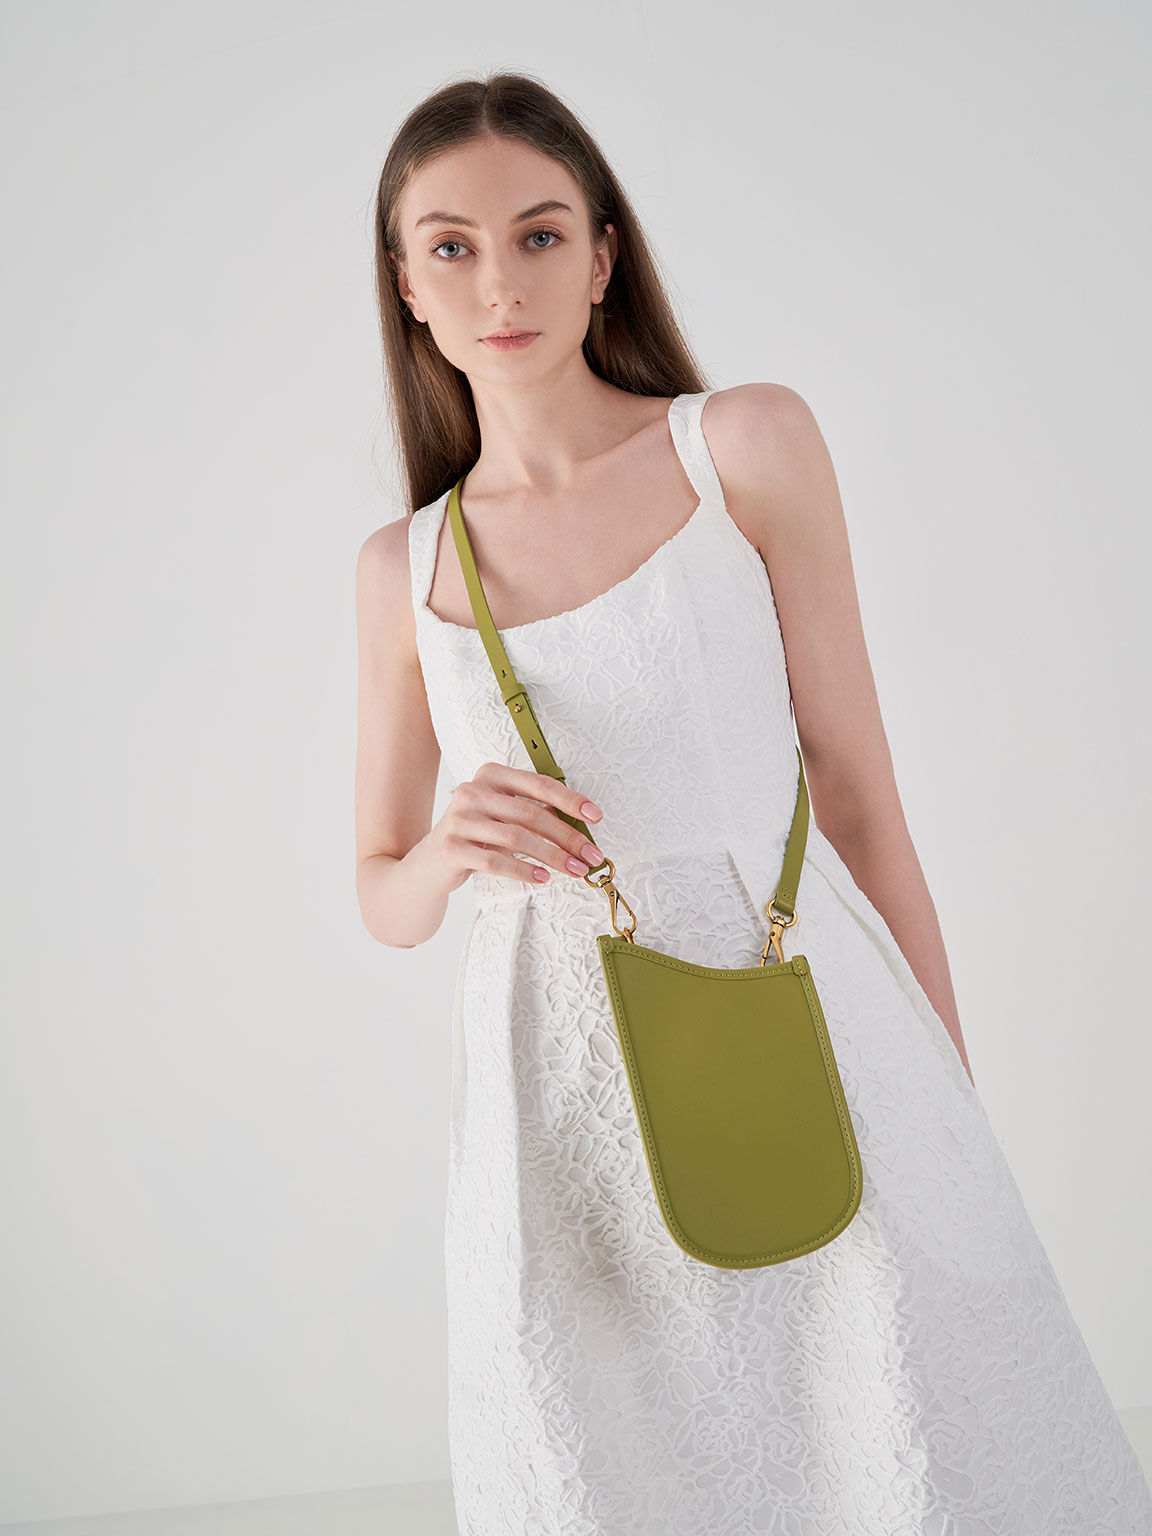 CHARLES Phone Aviary International & Avocado - Bead-Embellished Strap KEITH Pouch